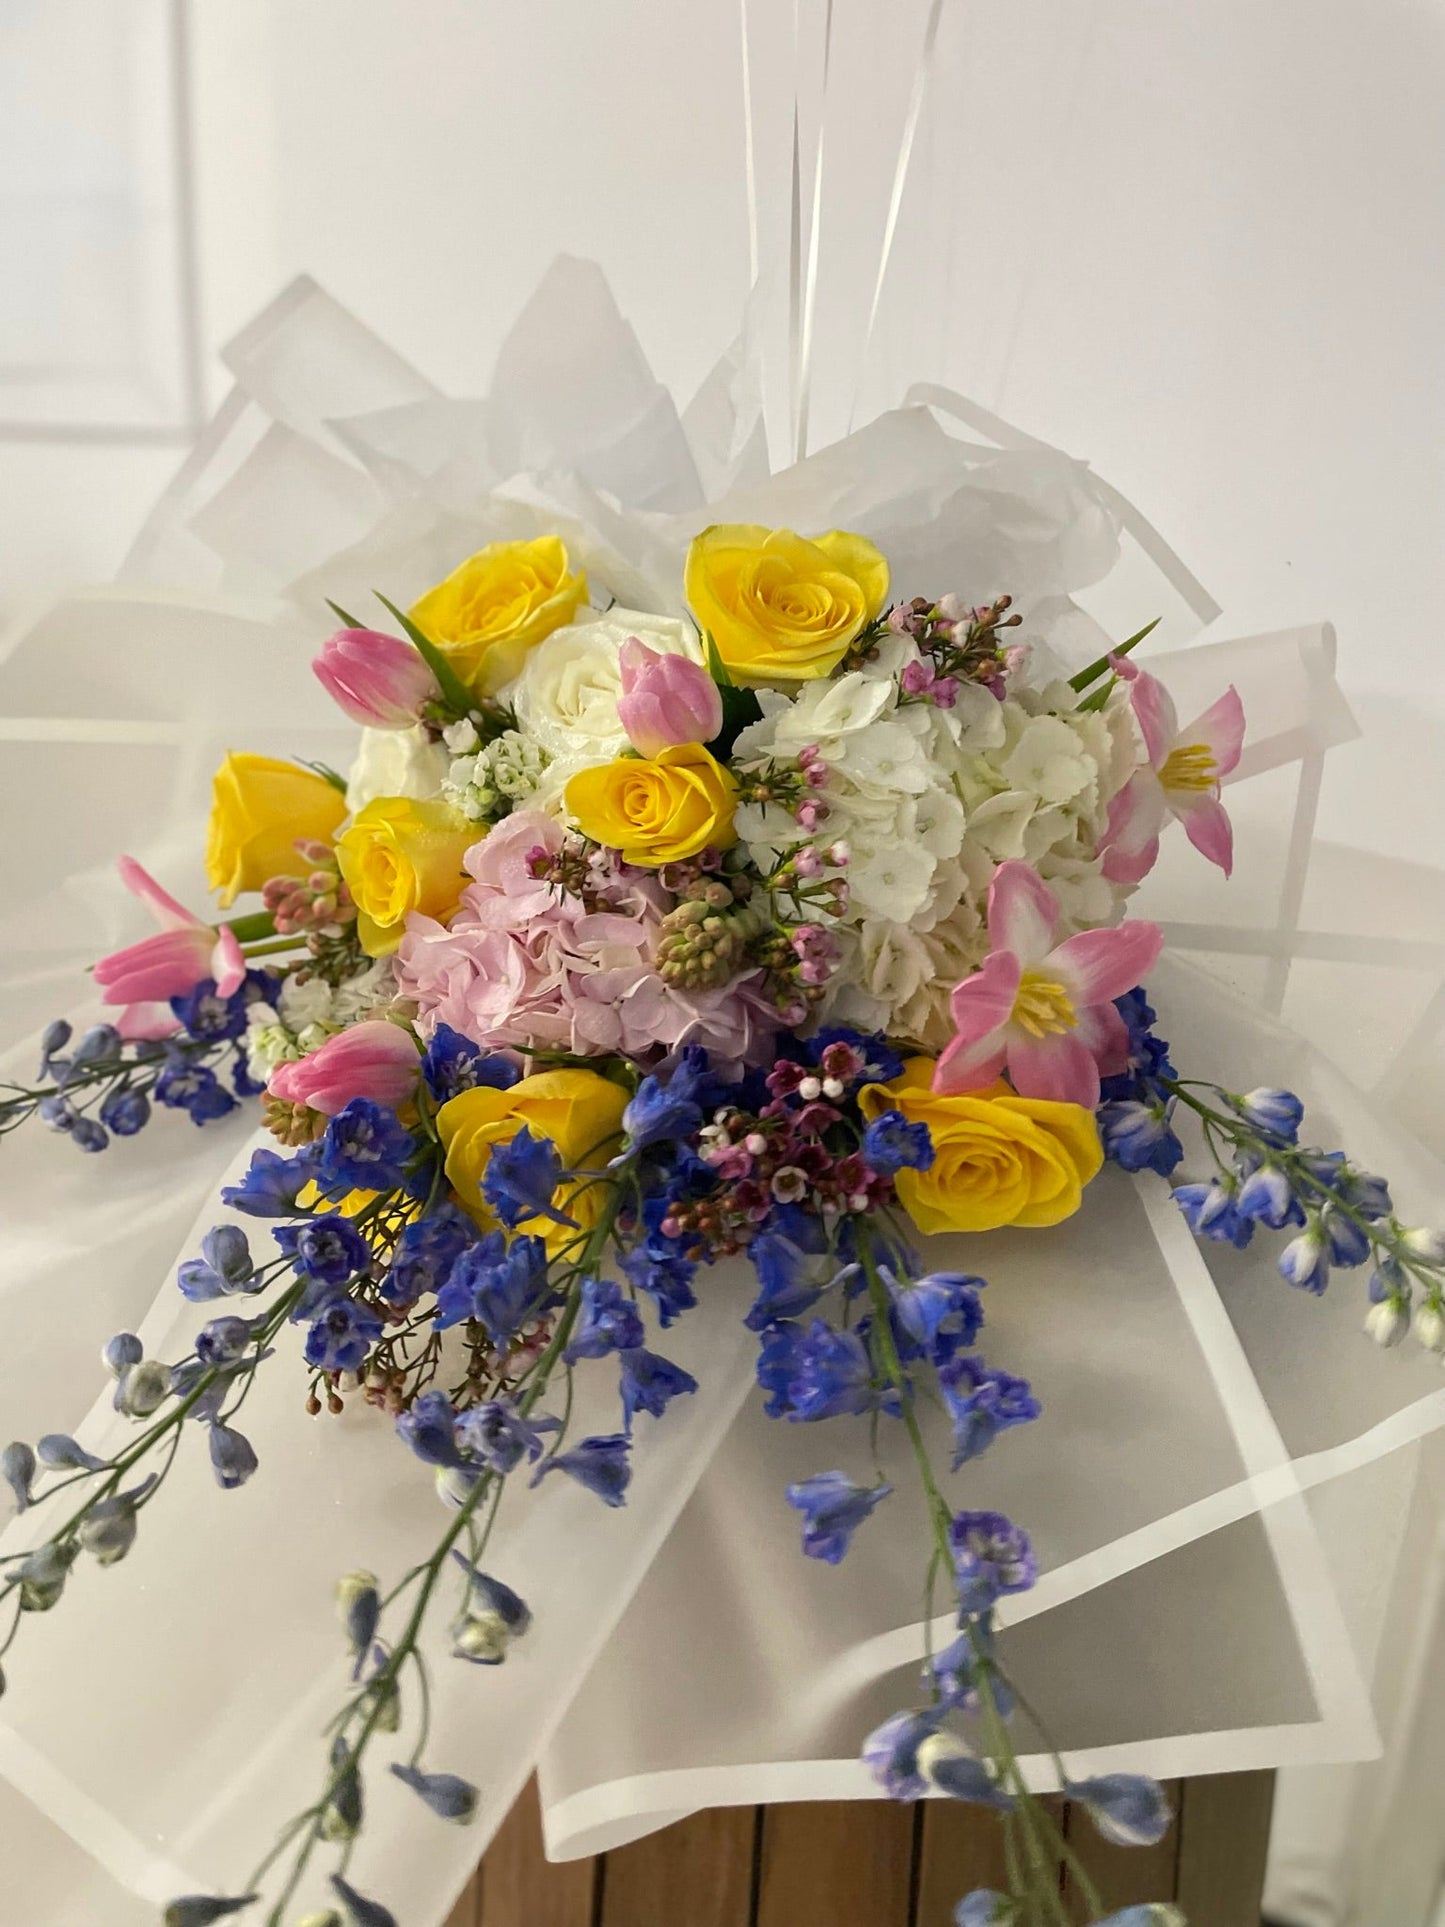 Blue delphinium with yellow roses in a vibrant coloured bouquet